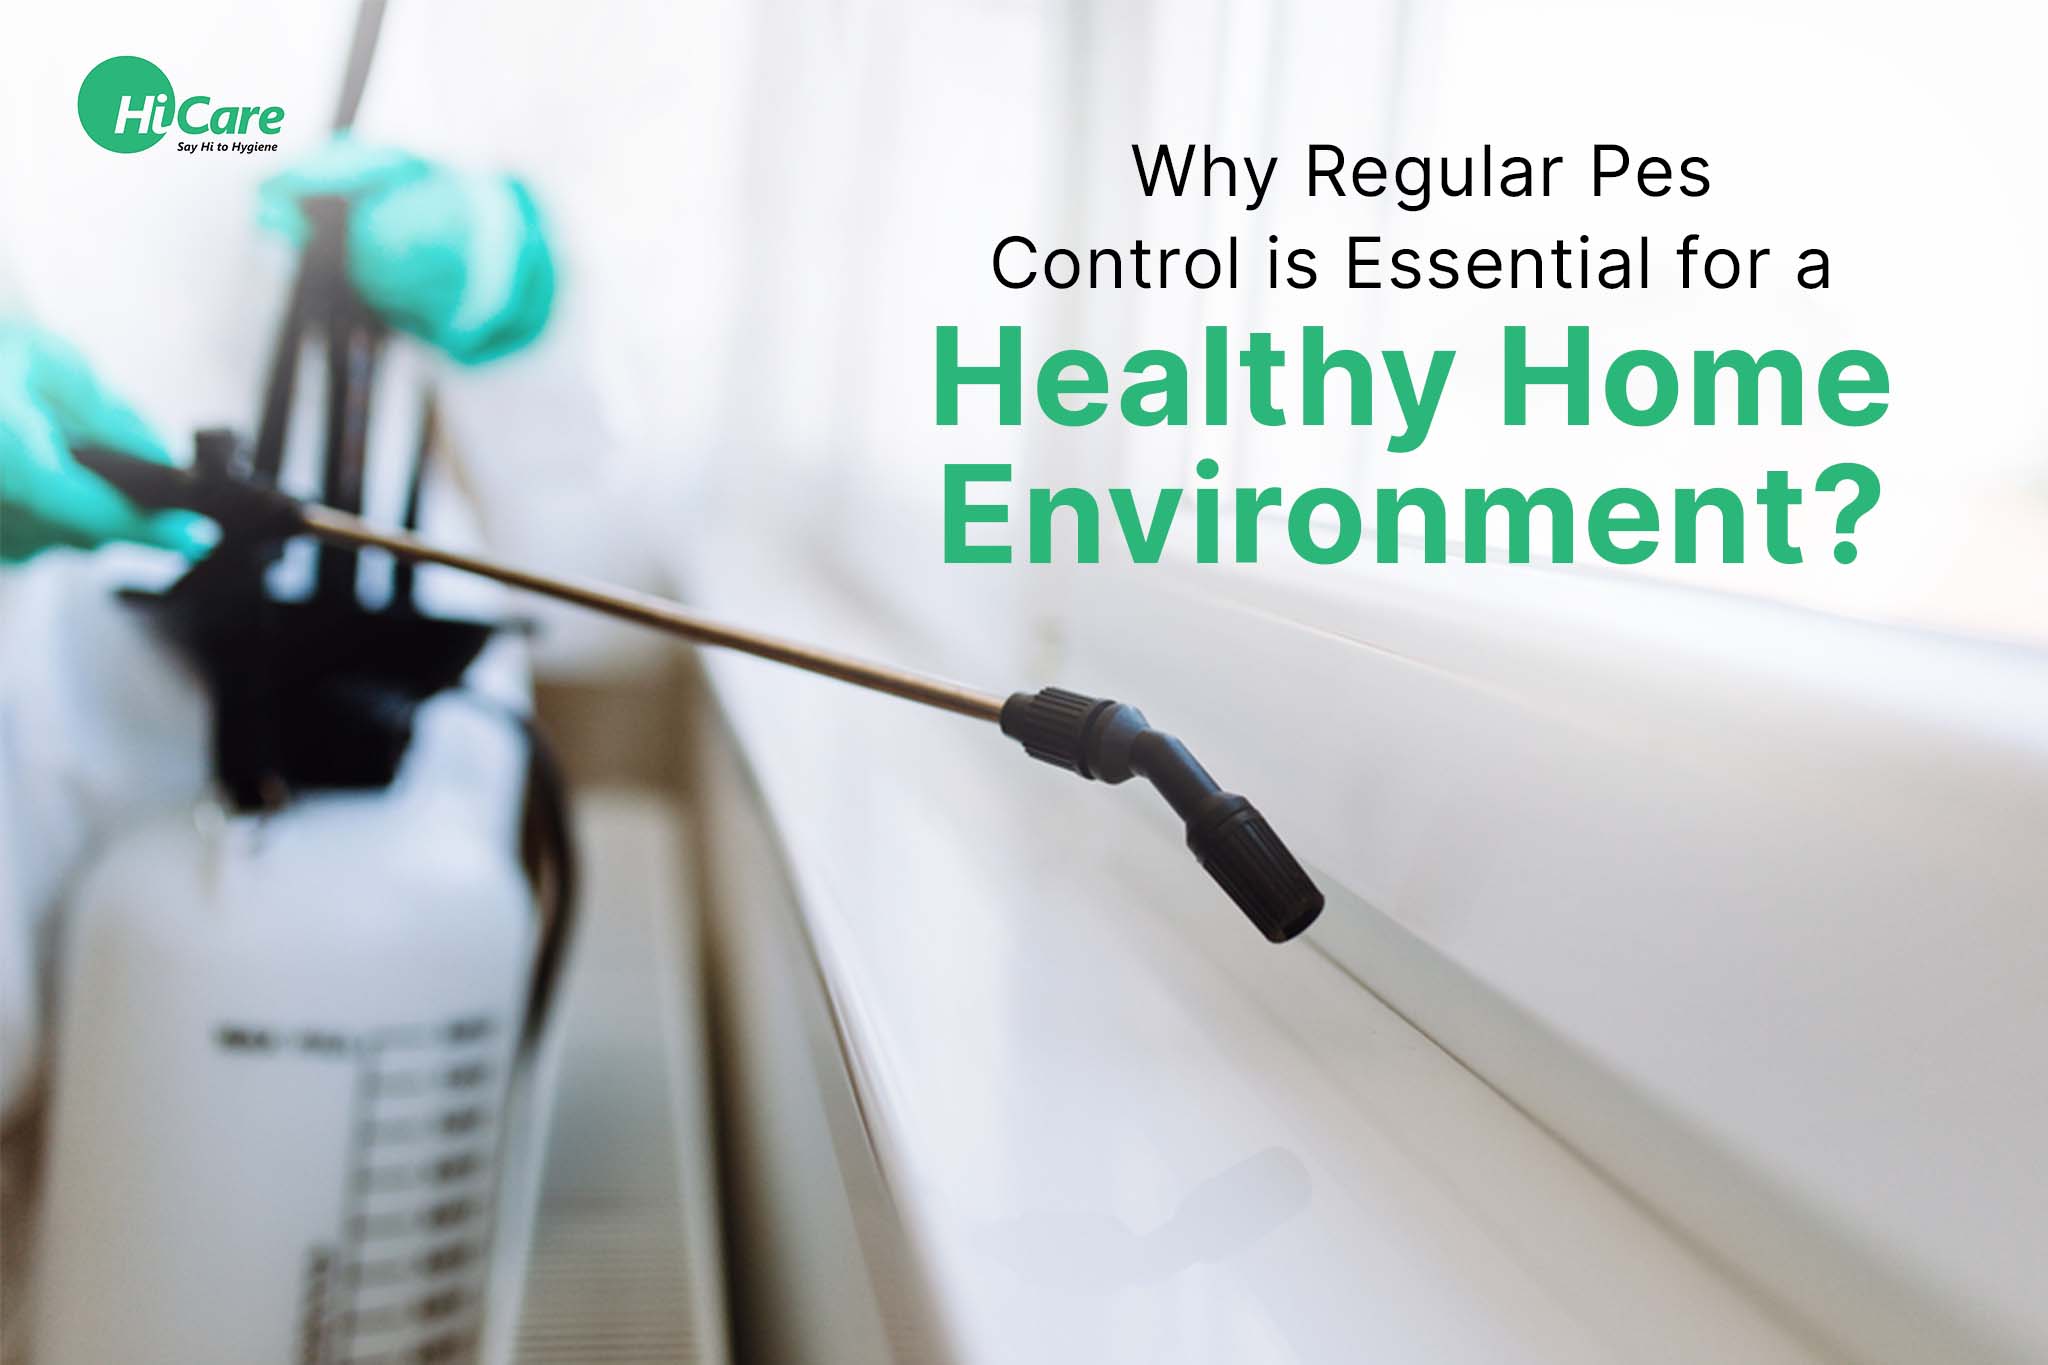 Why Regular Pest Control is Essential for a Healthy Home Environment?